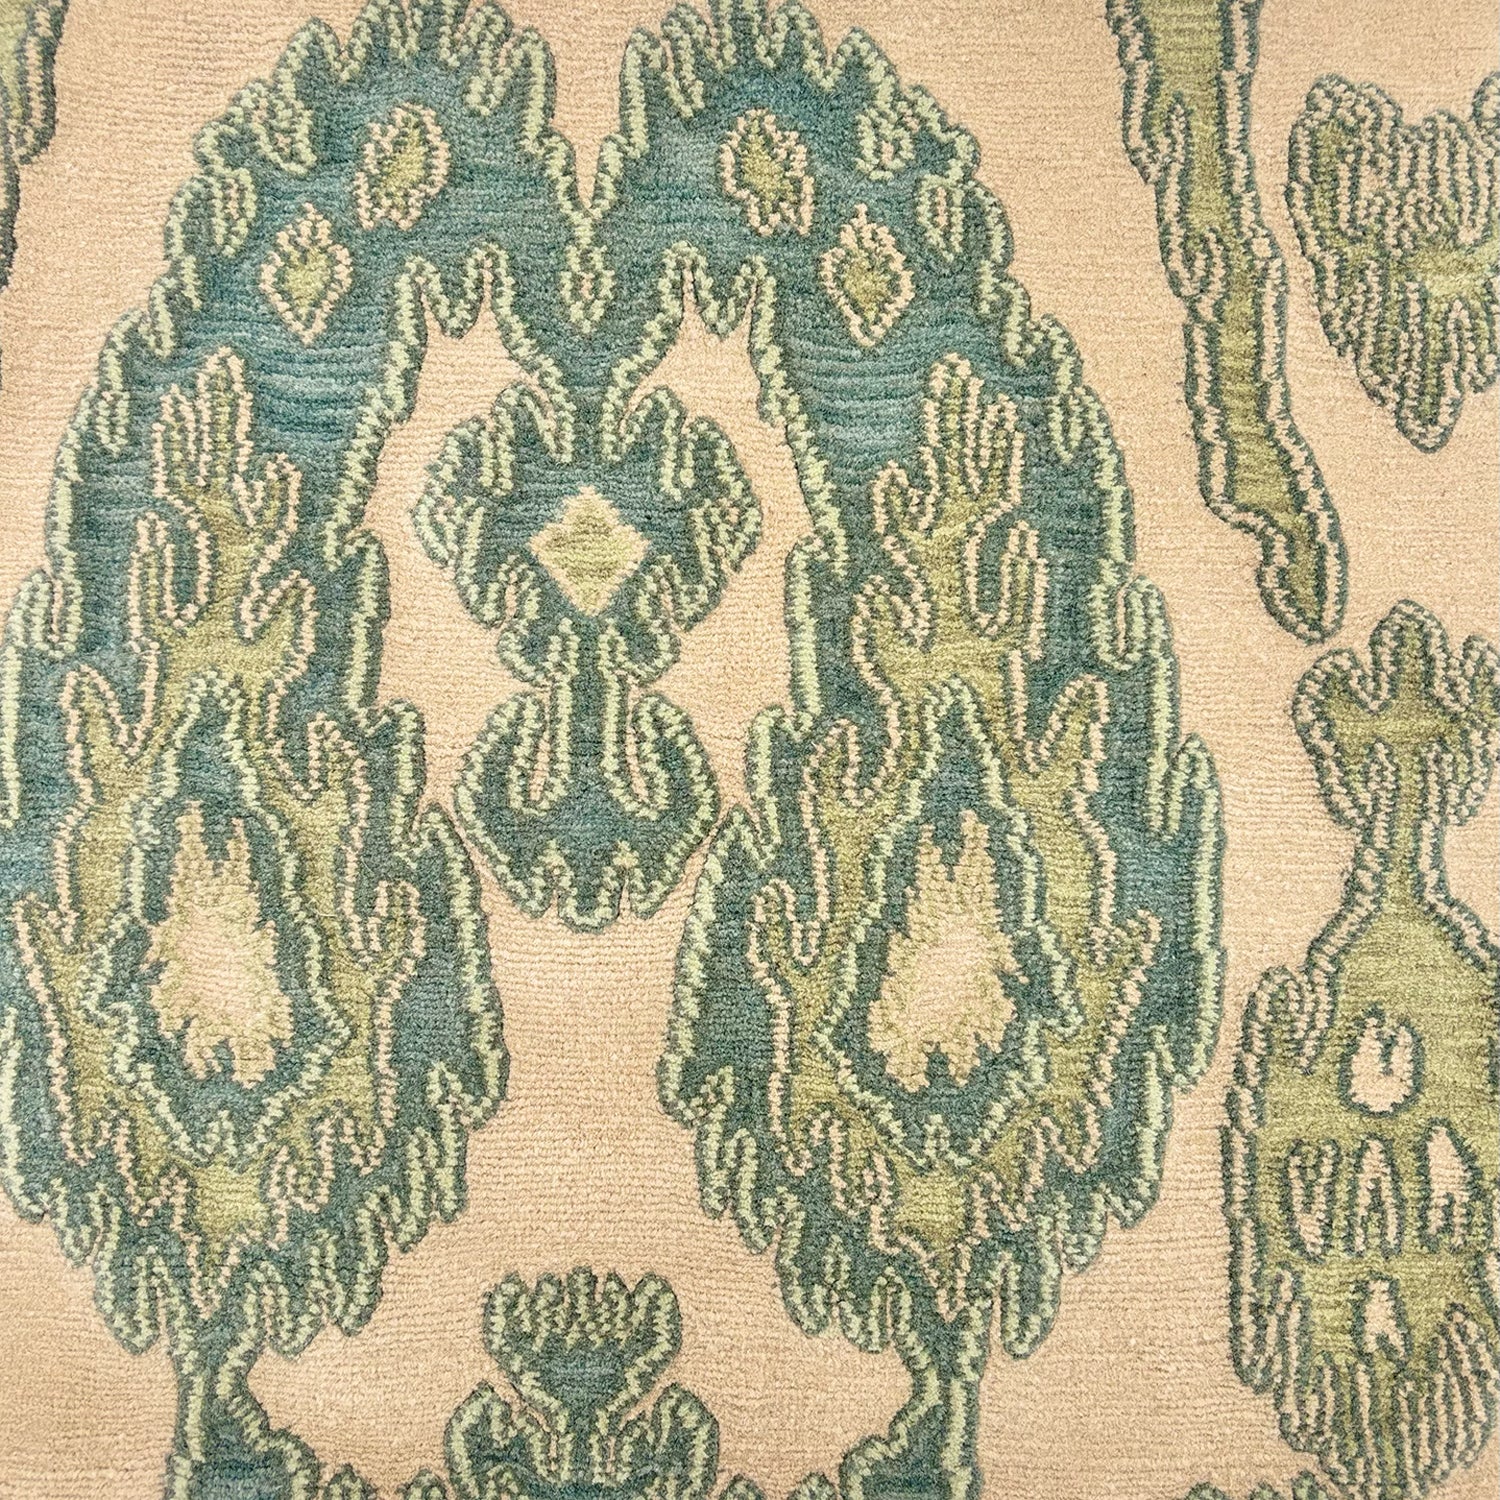 Detail of a silk rug with an ikat inpsired pattern in blue and breen on an ivory field